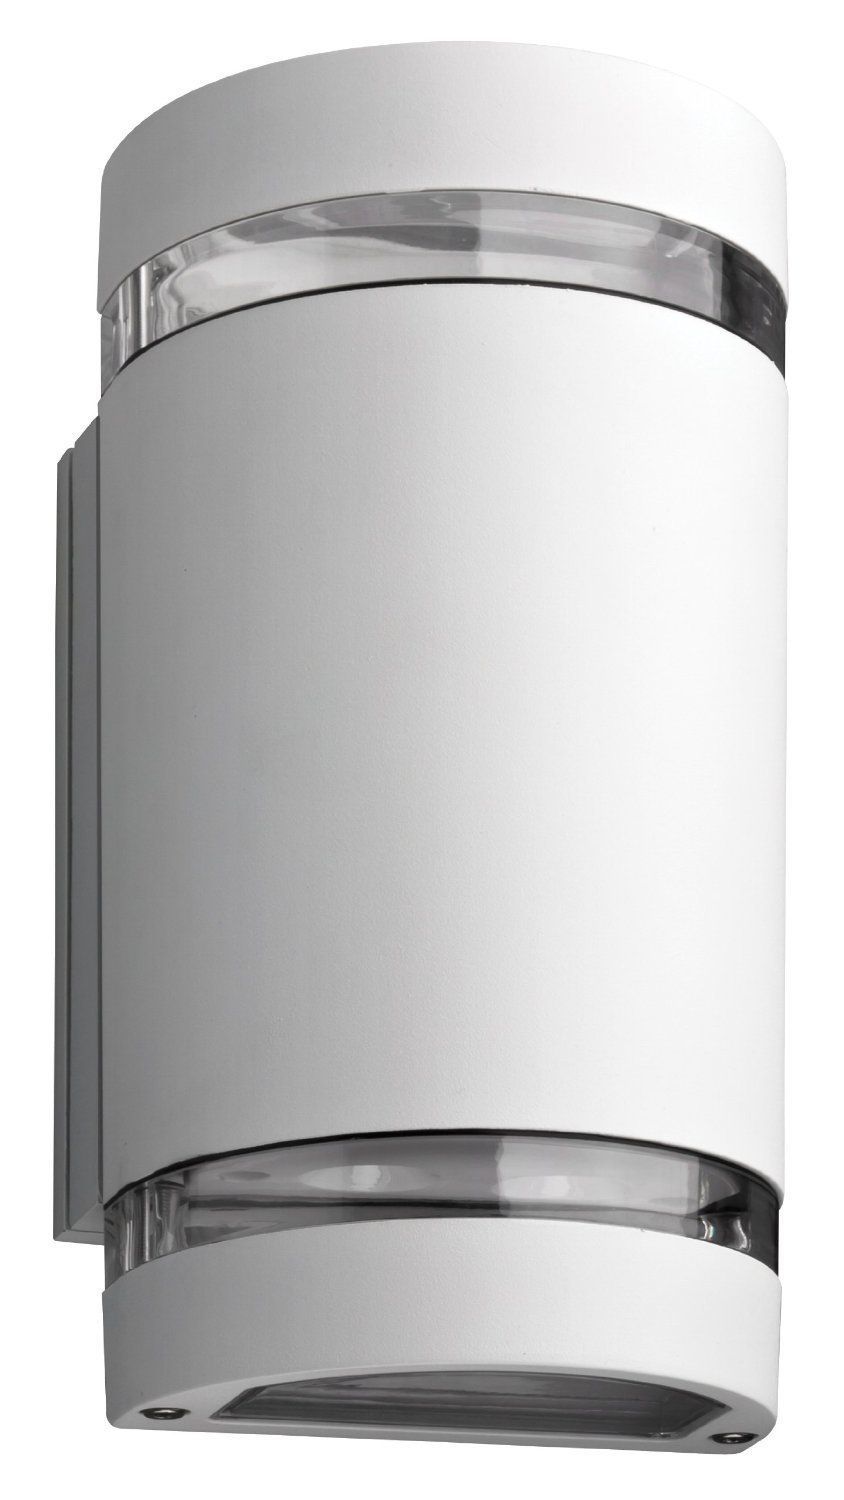 Lithonia Lighting Ollwu Wh M6 Outdoor Led Wall Cylinder 2 Light Up Regarding Outdoor Wall Lighting At Amazon (Photo 8 of 15)